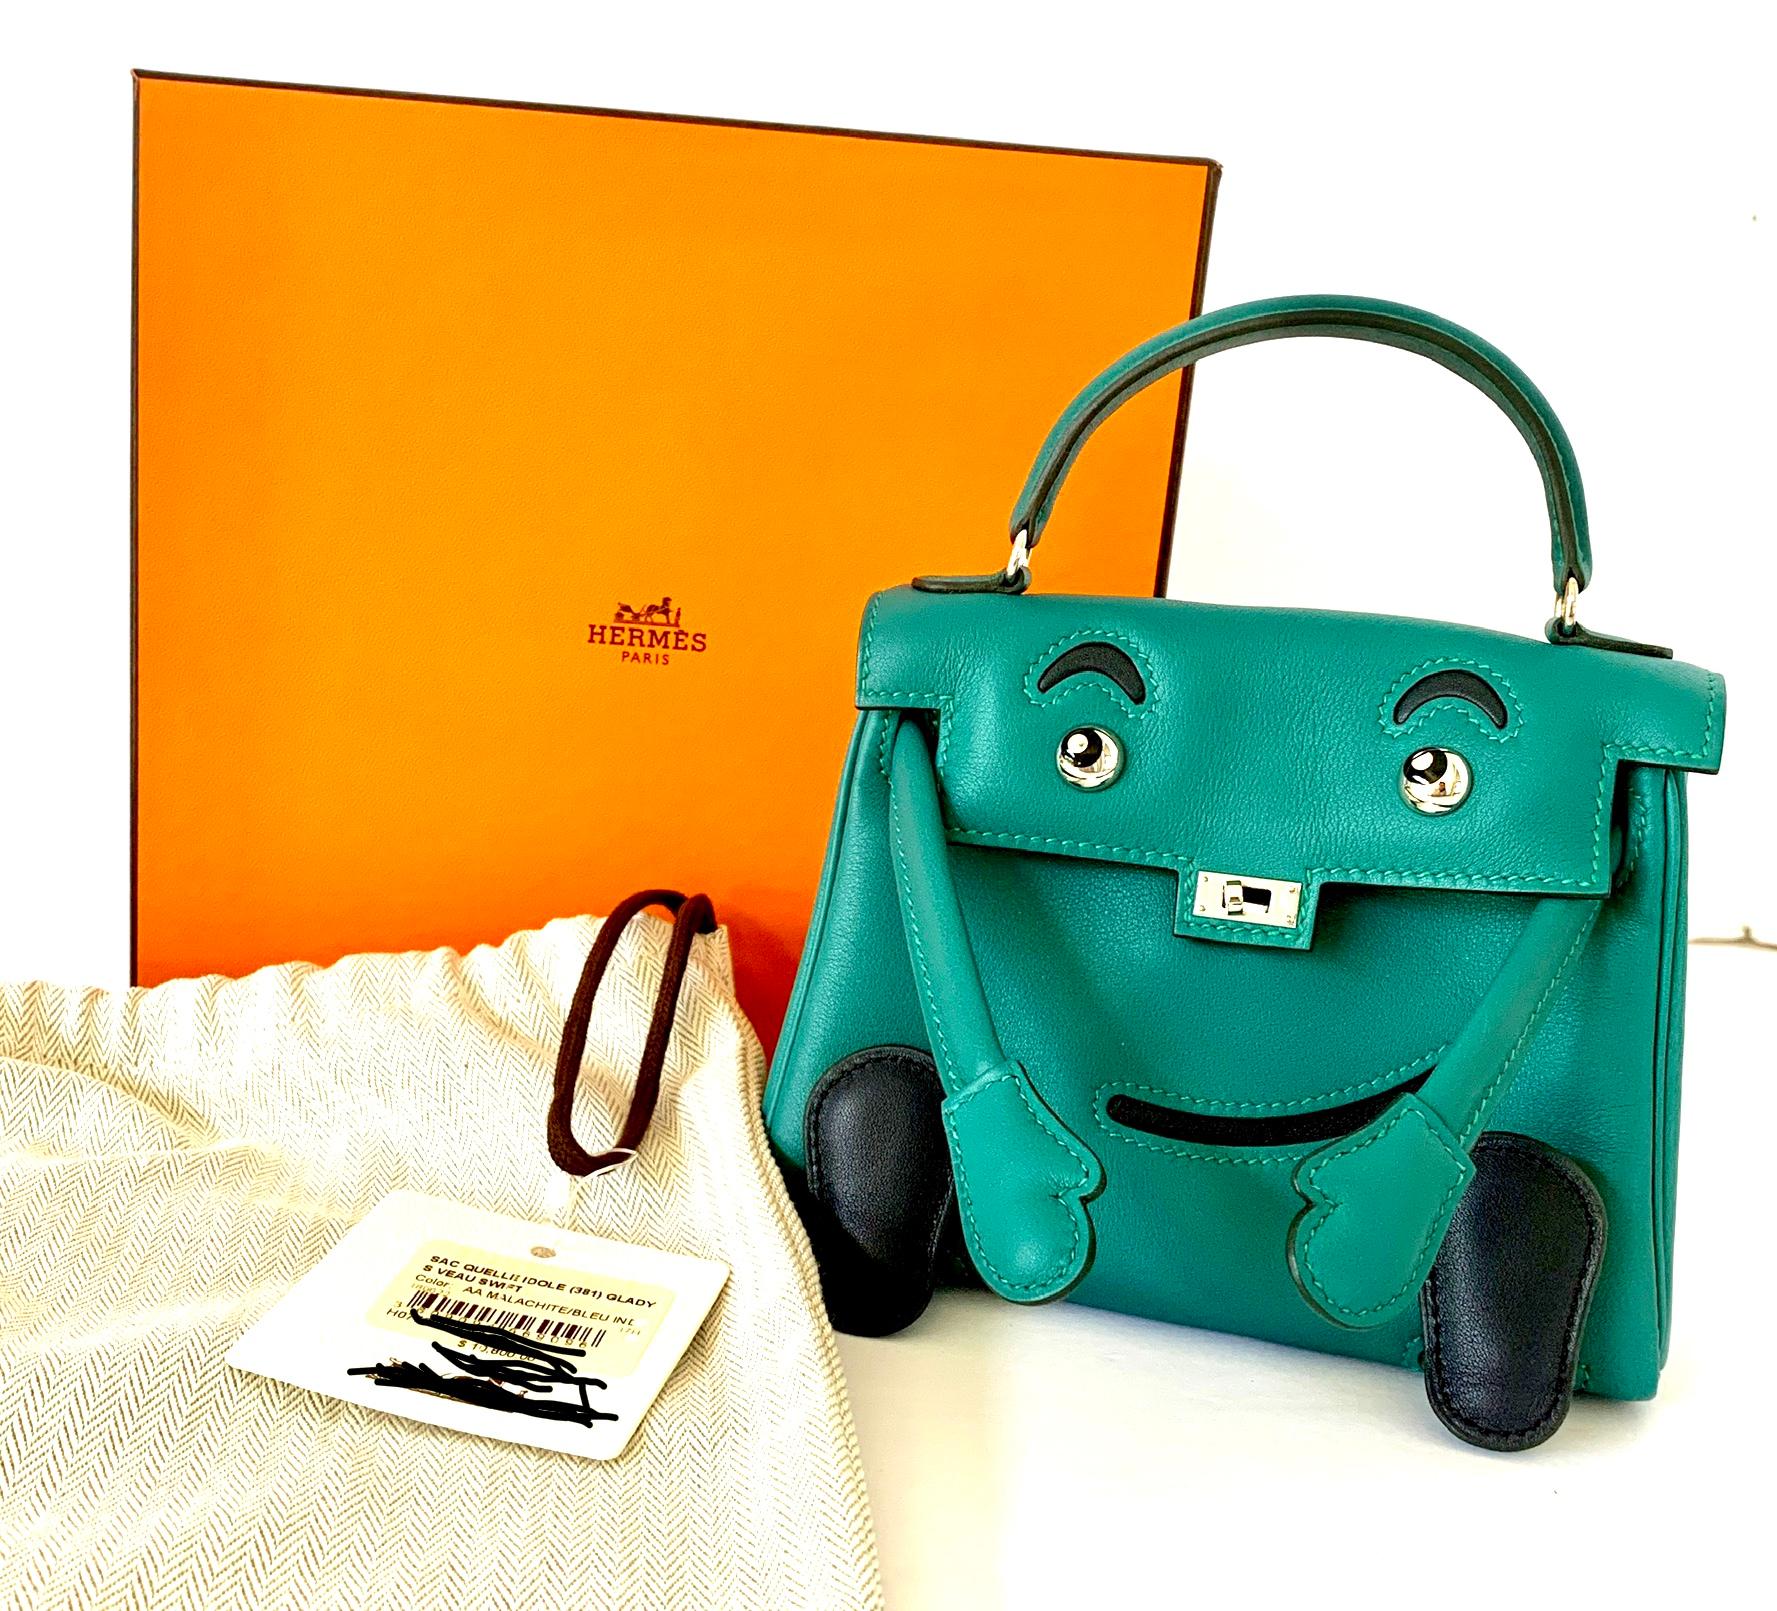 Guaranteed authentic limited edition 
One of the Rarest Hermes Bag in the World

The Quelle Idole Kelly Doll Bag

Malachite

C Stamp

Original receipt included

Hermes Limited Edition Pink Swift Leather Quelle Idole Kelly Doll Bag.